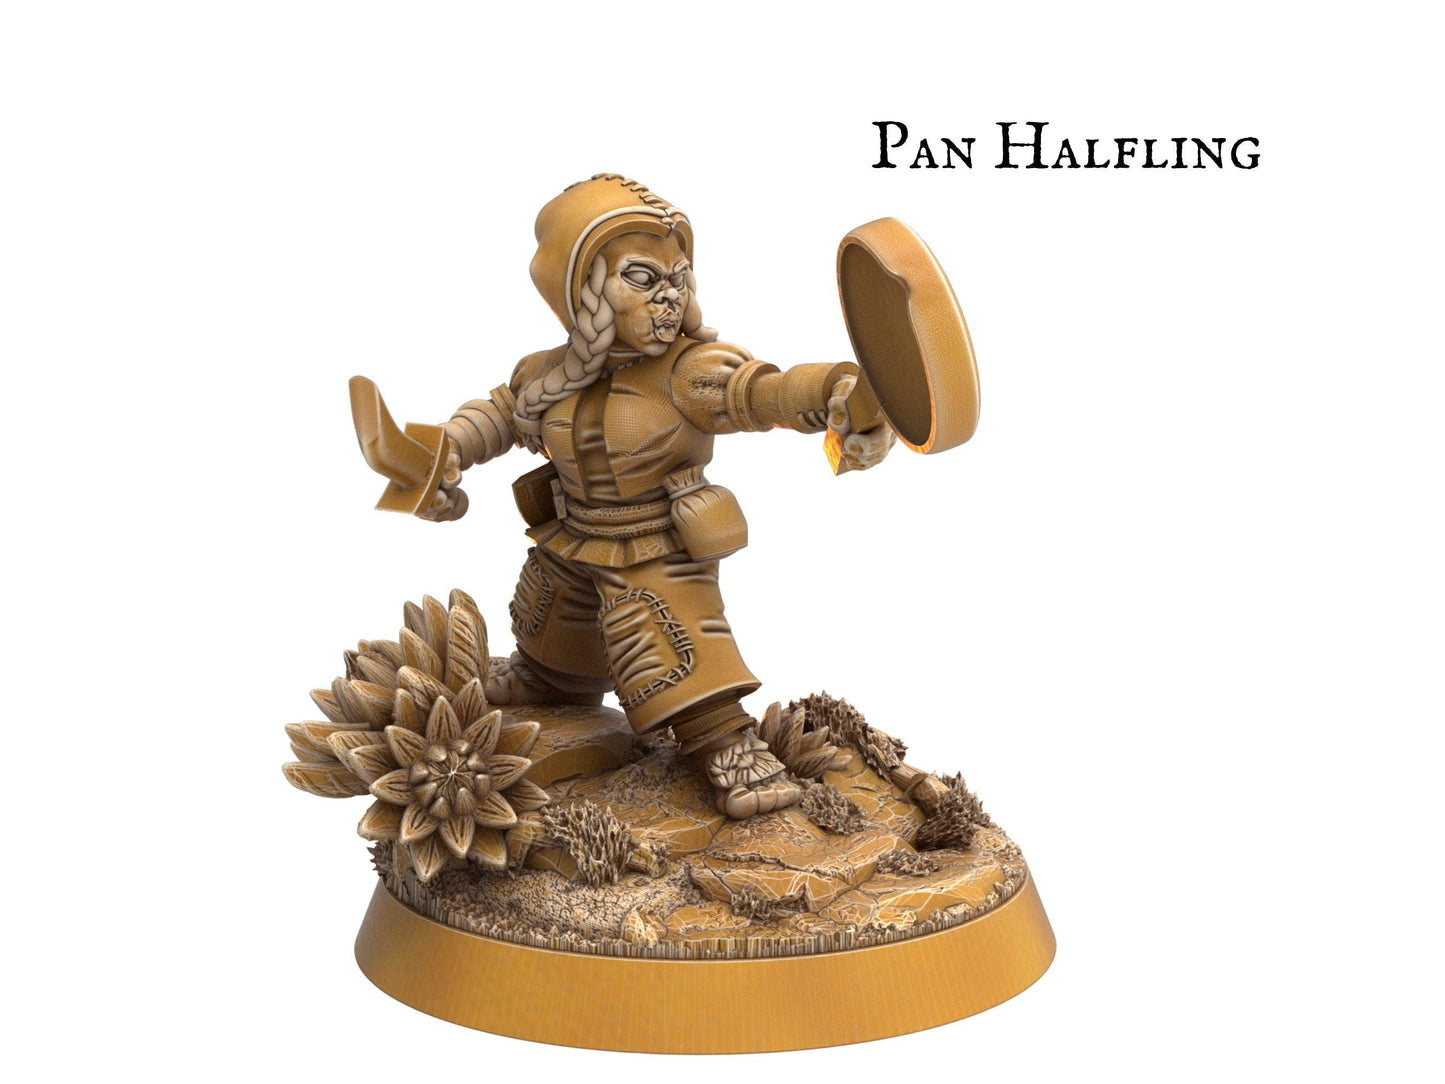 Female Halfling Miniature with bow and arrow - 9 Poses - 32mm scale Tabletop gaming DnD Miniature Dungeons and Dragons, halfling archer - Plague Miniatures shop for DnD Miniatures